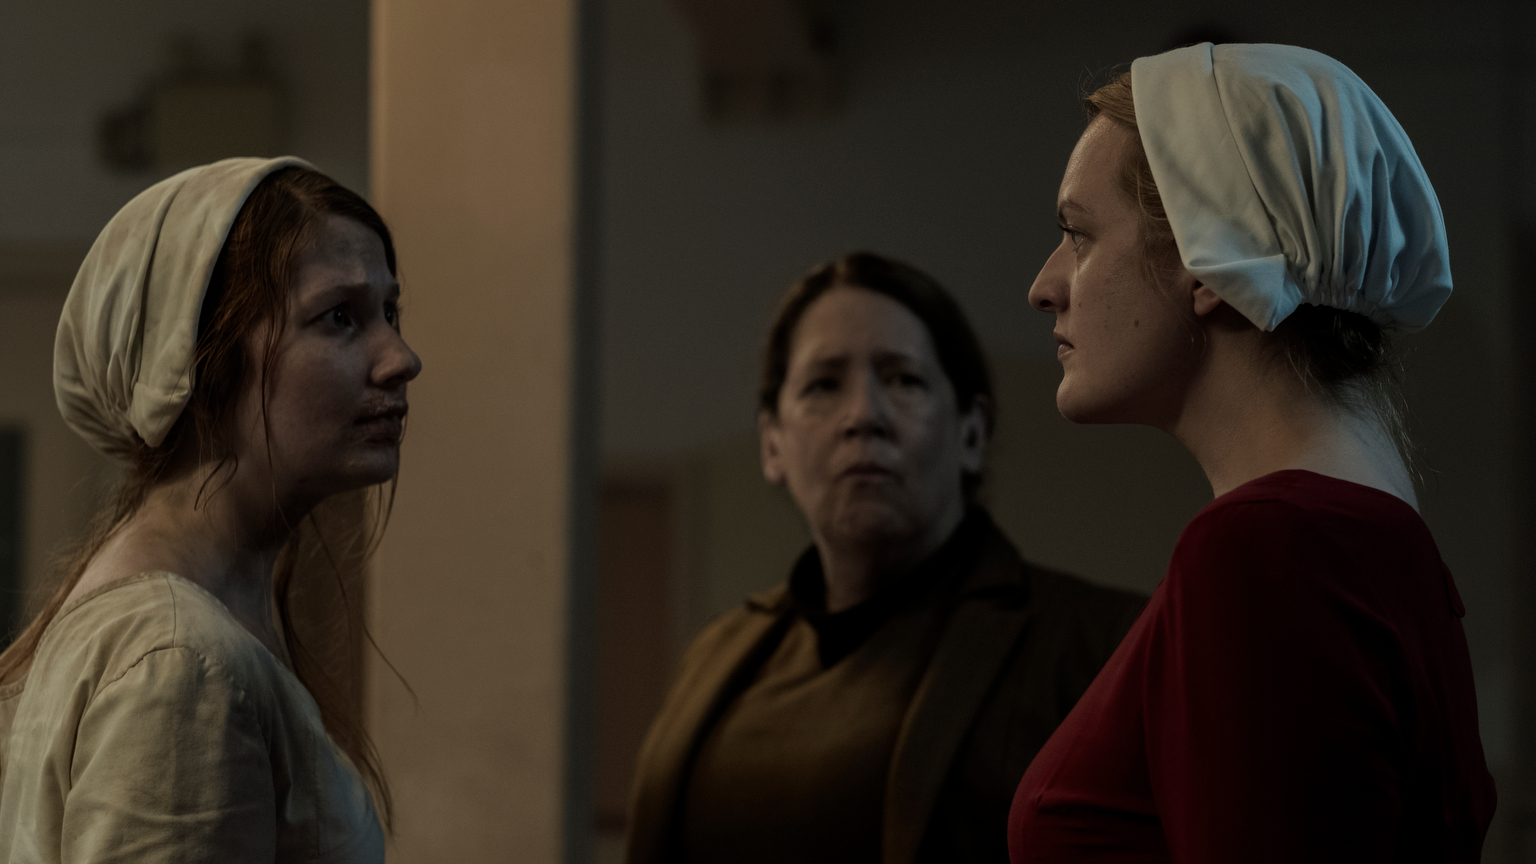 The Handmaid’s Tale Returns With Fire, Fury And Revolution